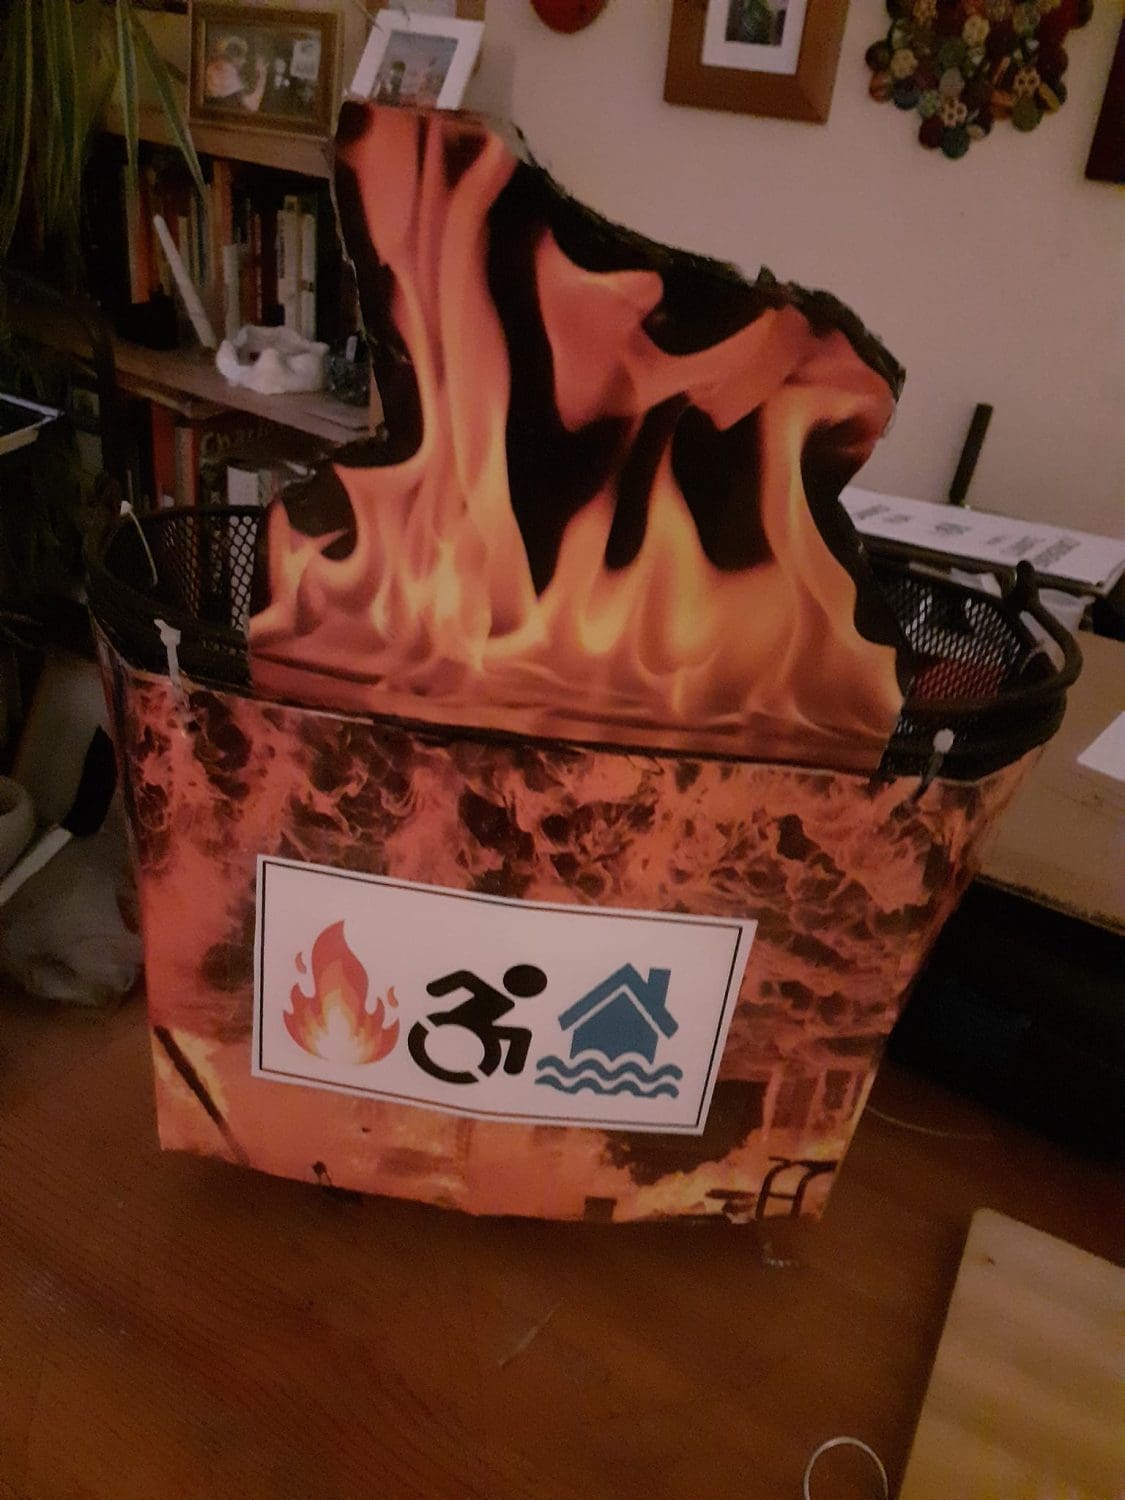 A wheelchair covered in pretend flames